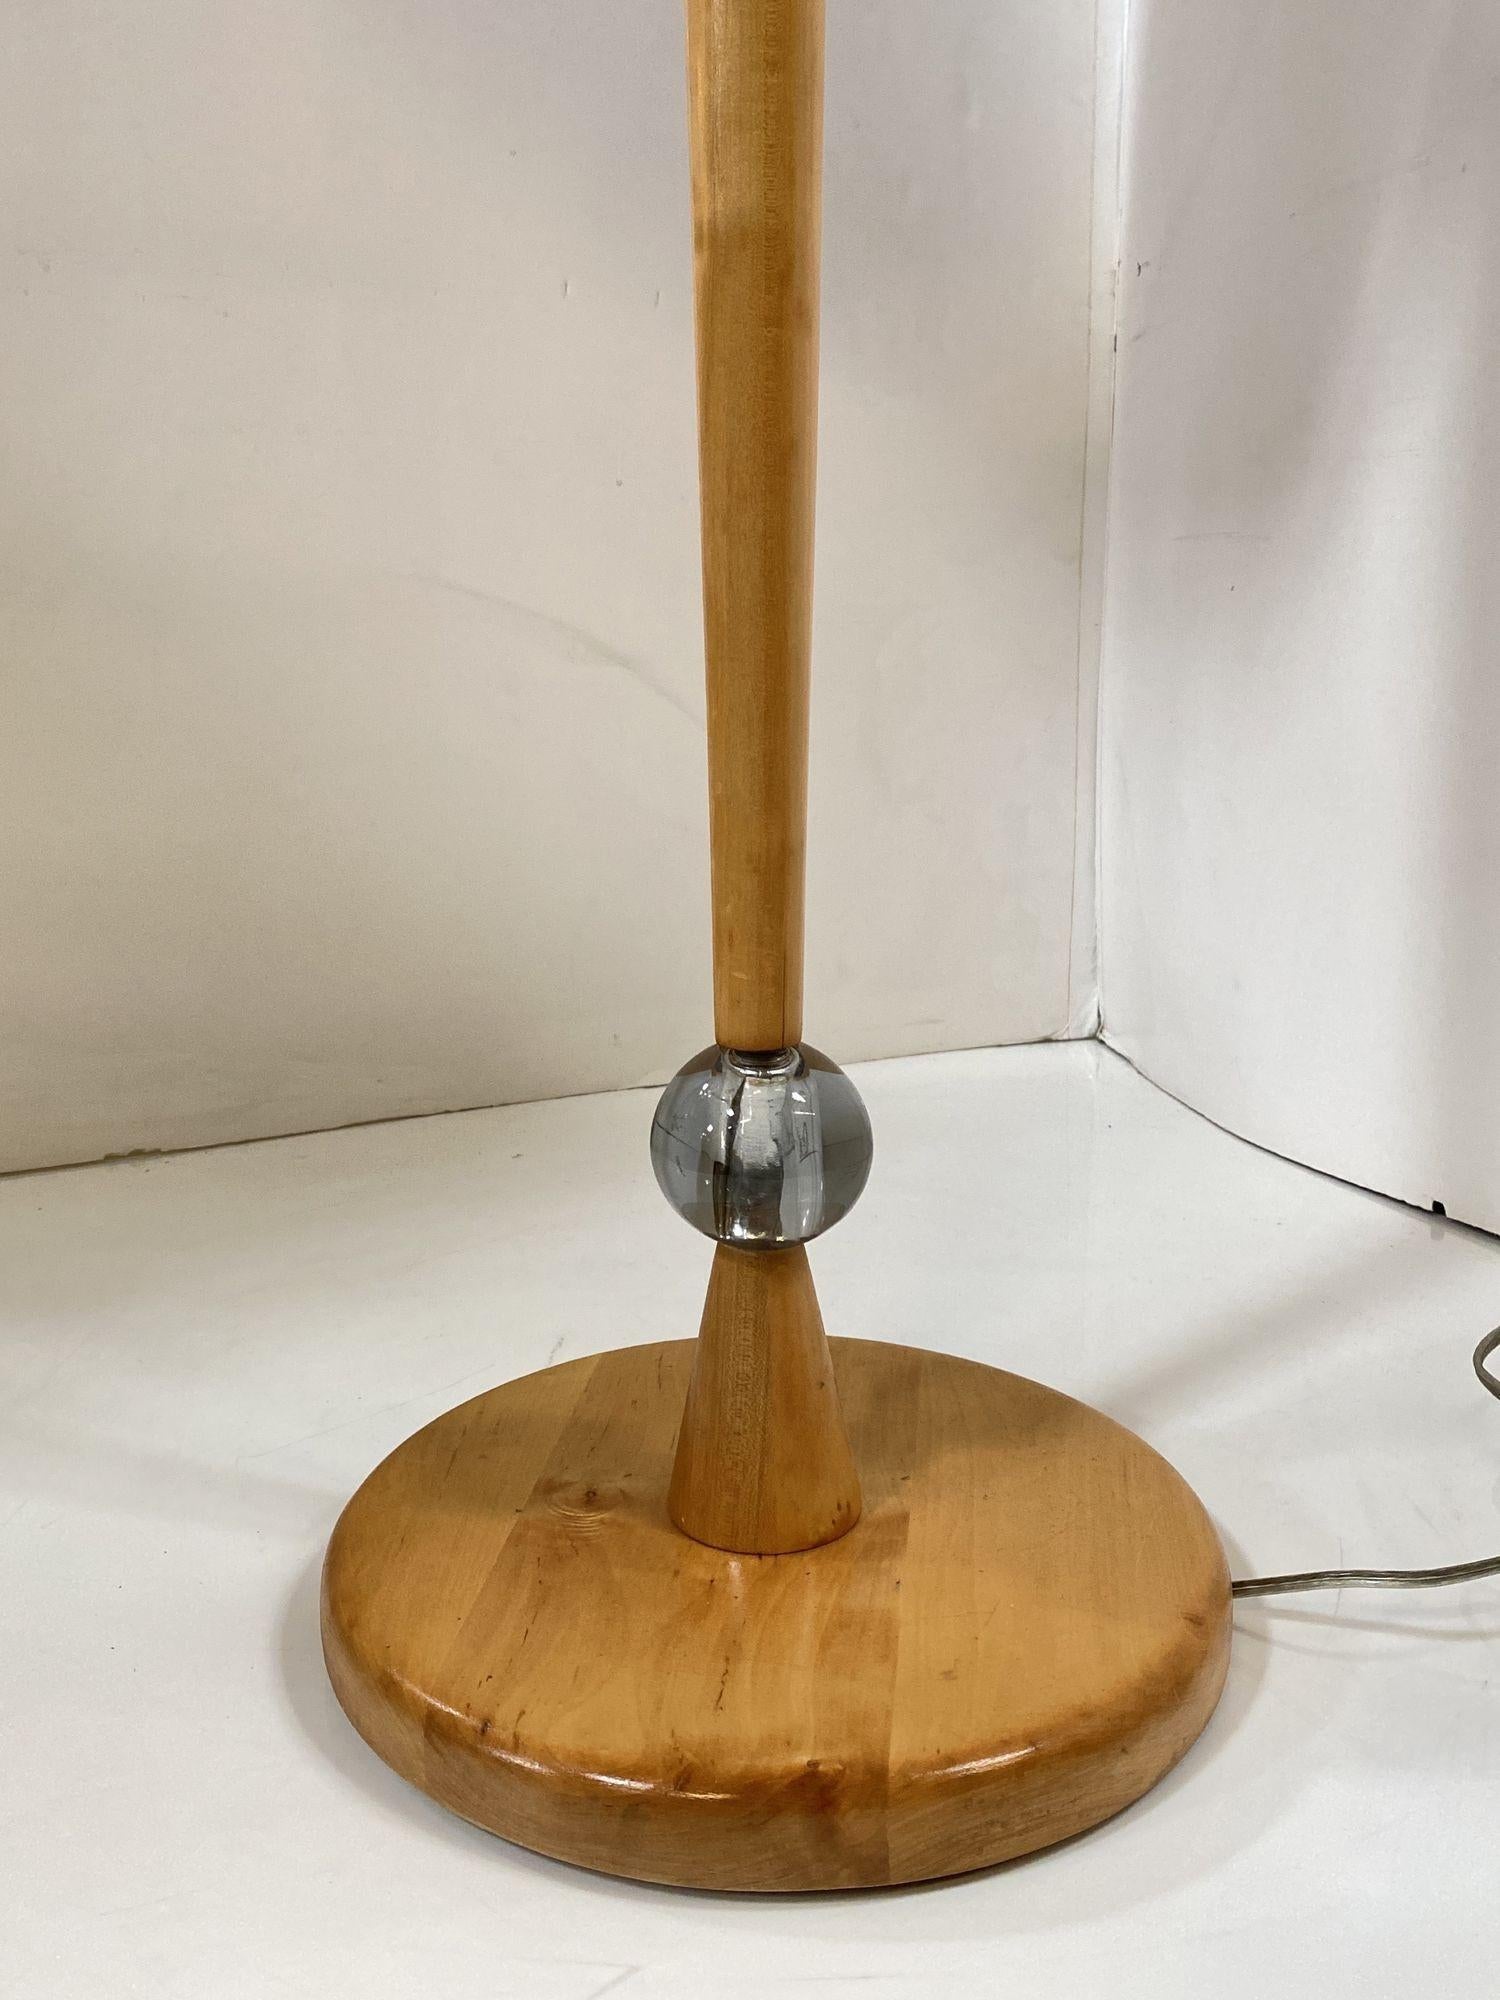 American Midcentury Sculpted Maple and Lucite Floor Lamp W/ Wood Shade For Sale